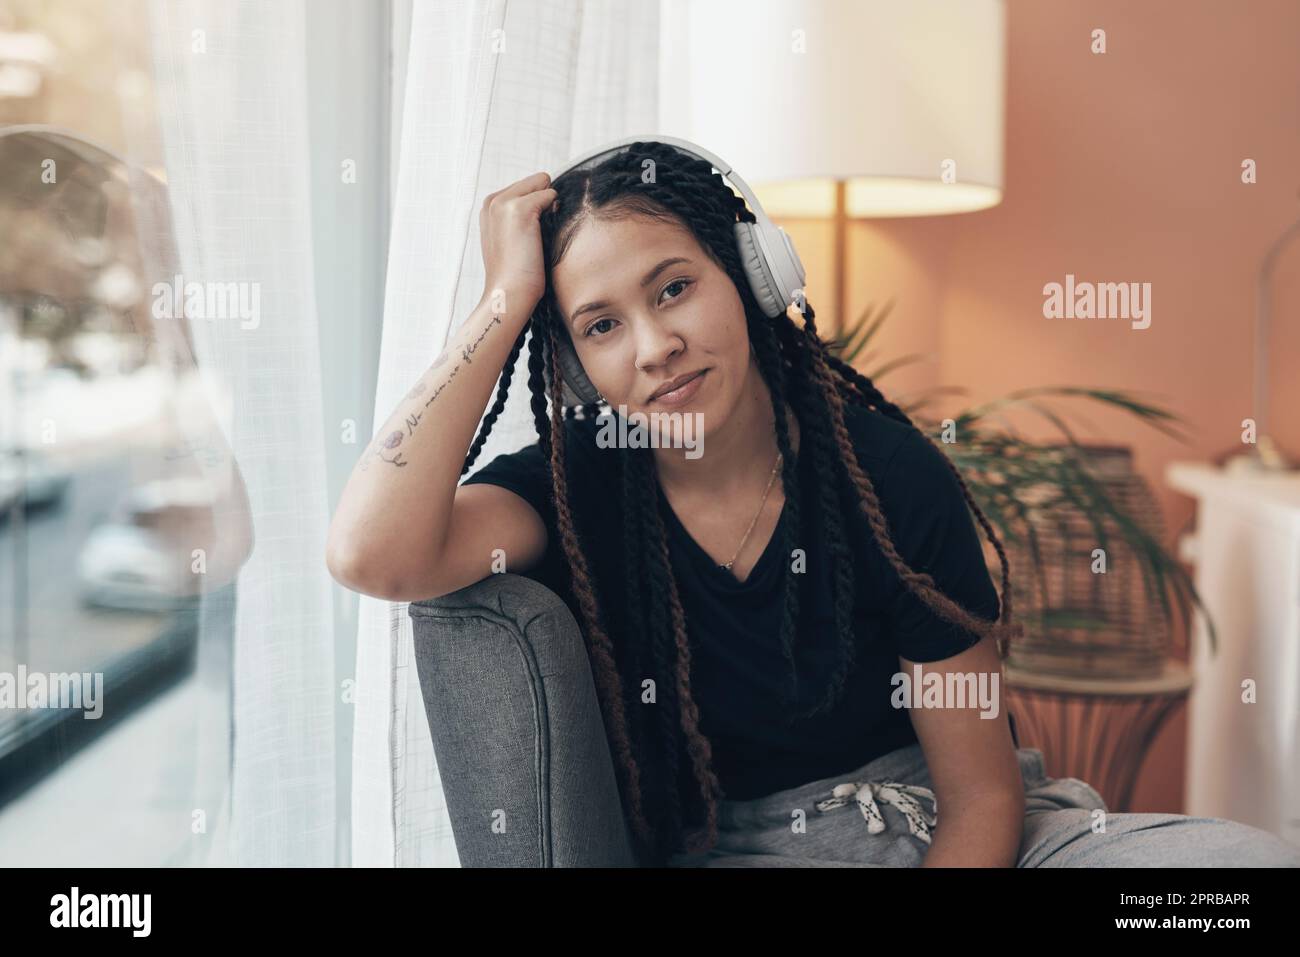 When life slows down, I turn the beat up. Portrait of a young woman using headphones at home. Stock Photo